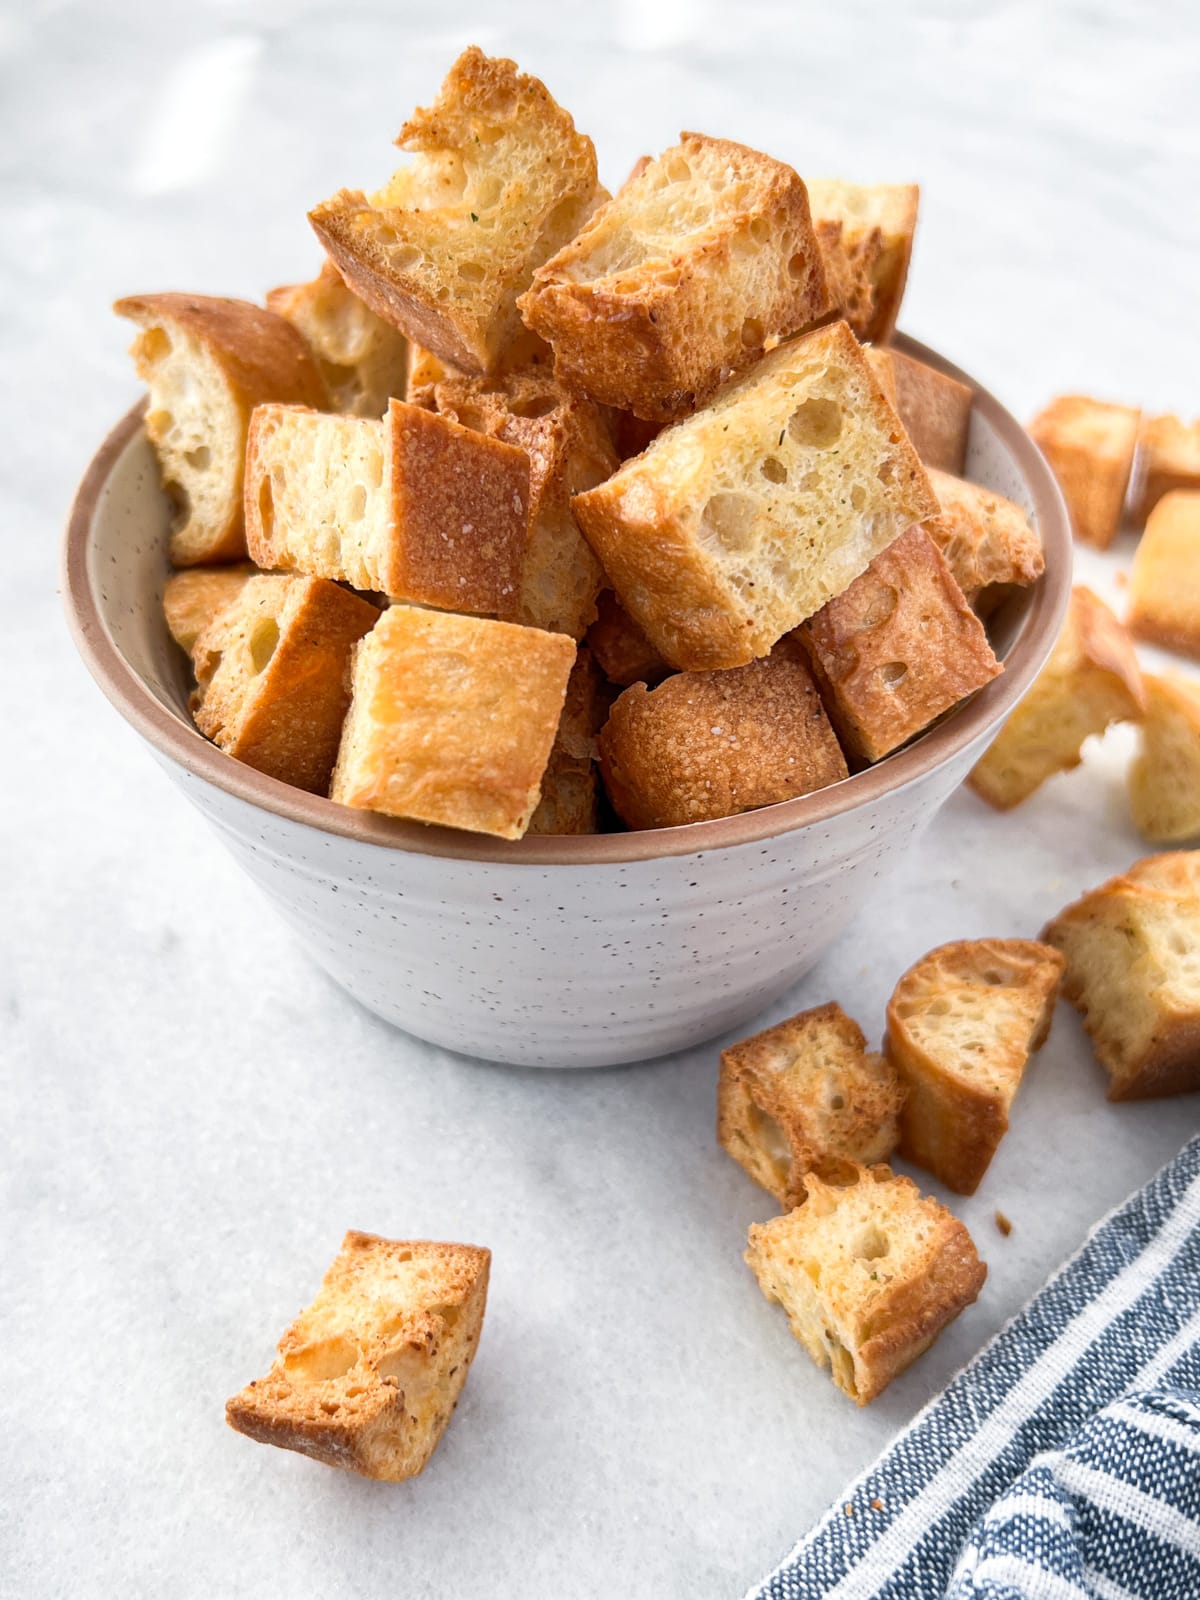 Overflowing bowl of crispy golden brown croutons on a white countertop.